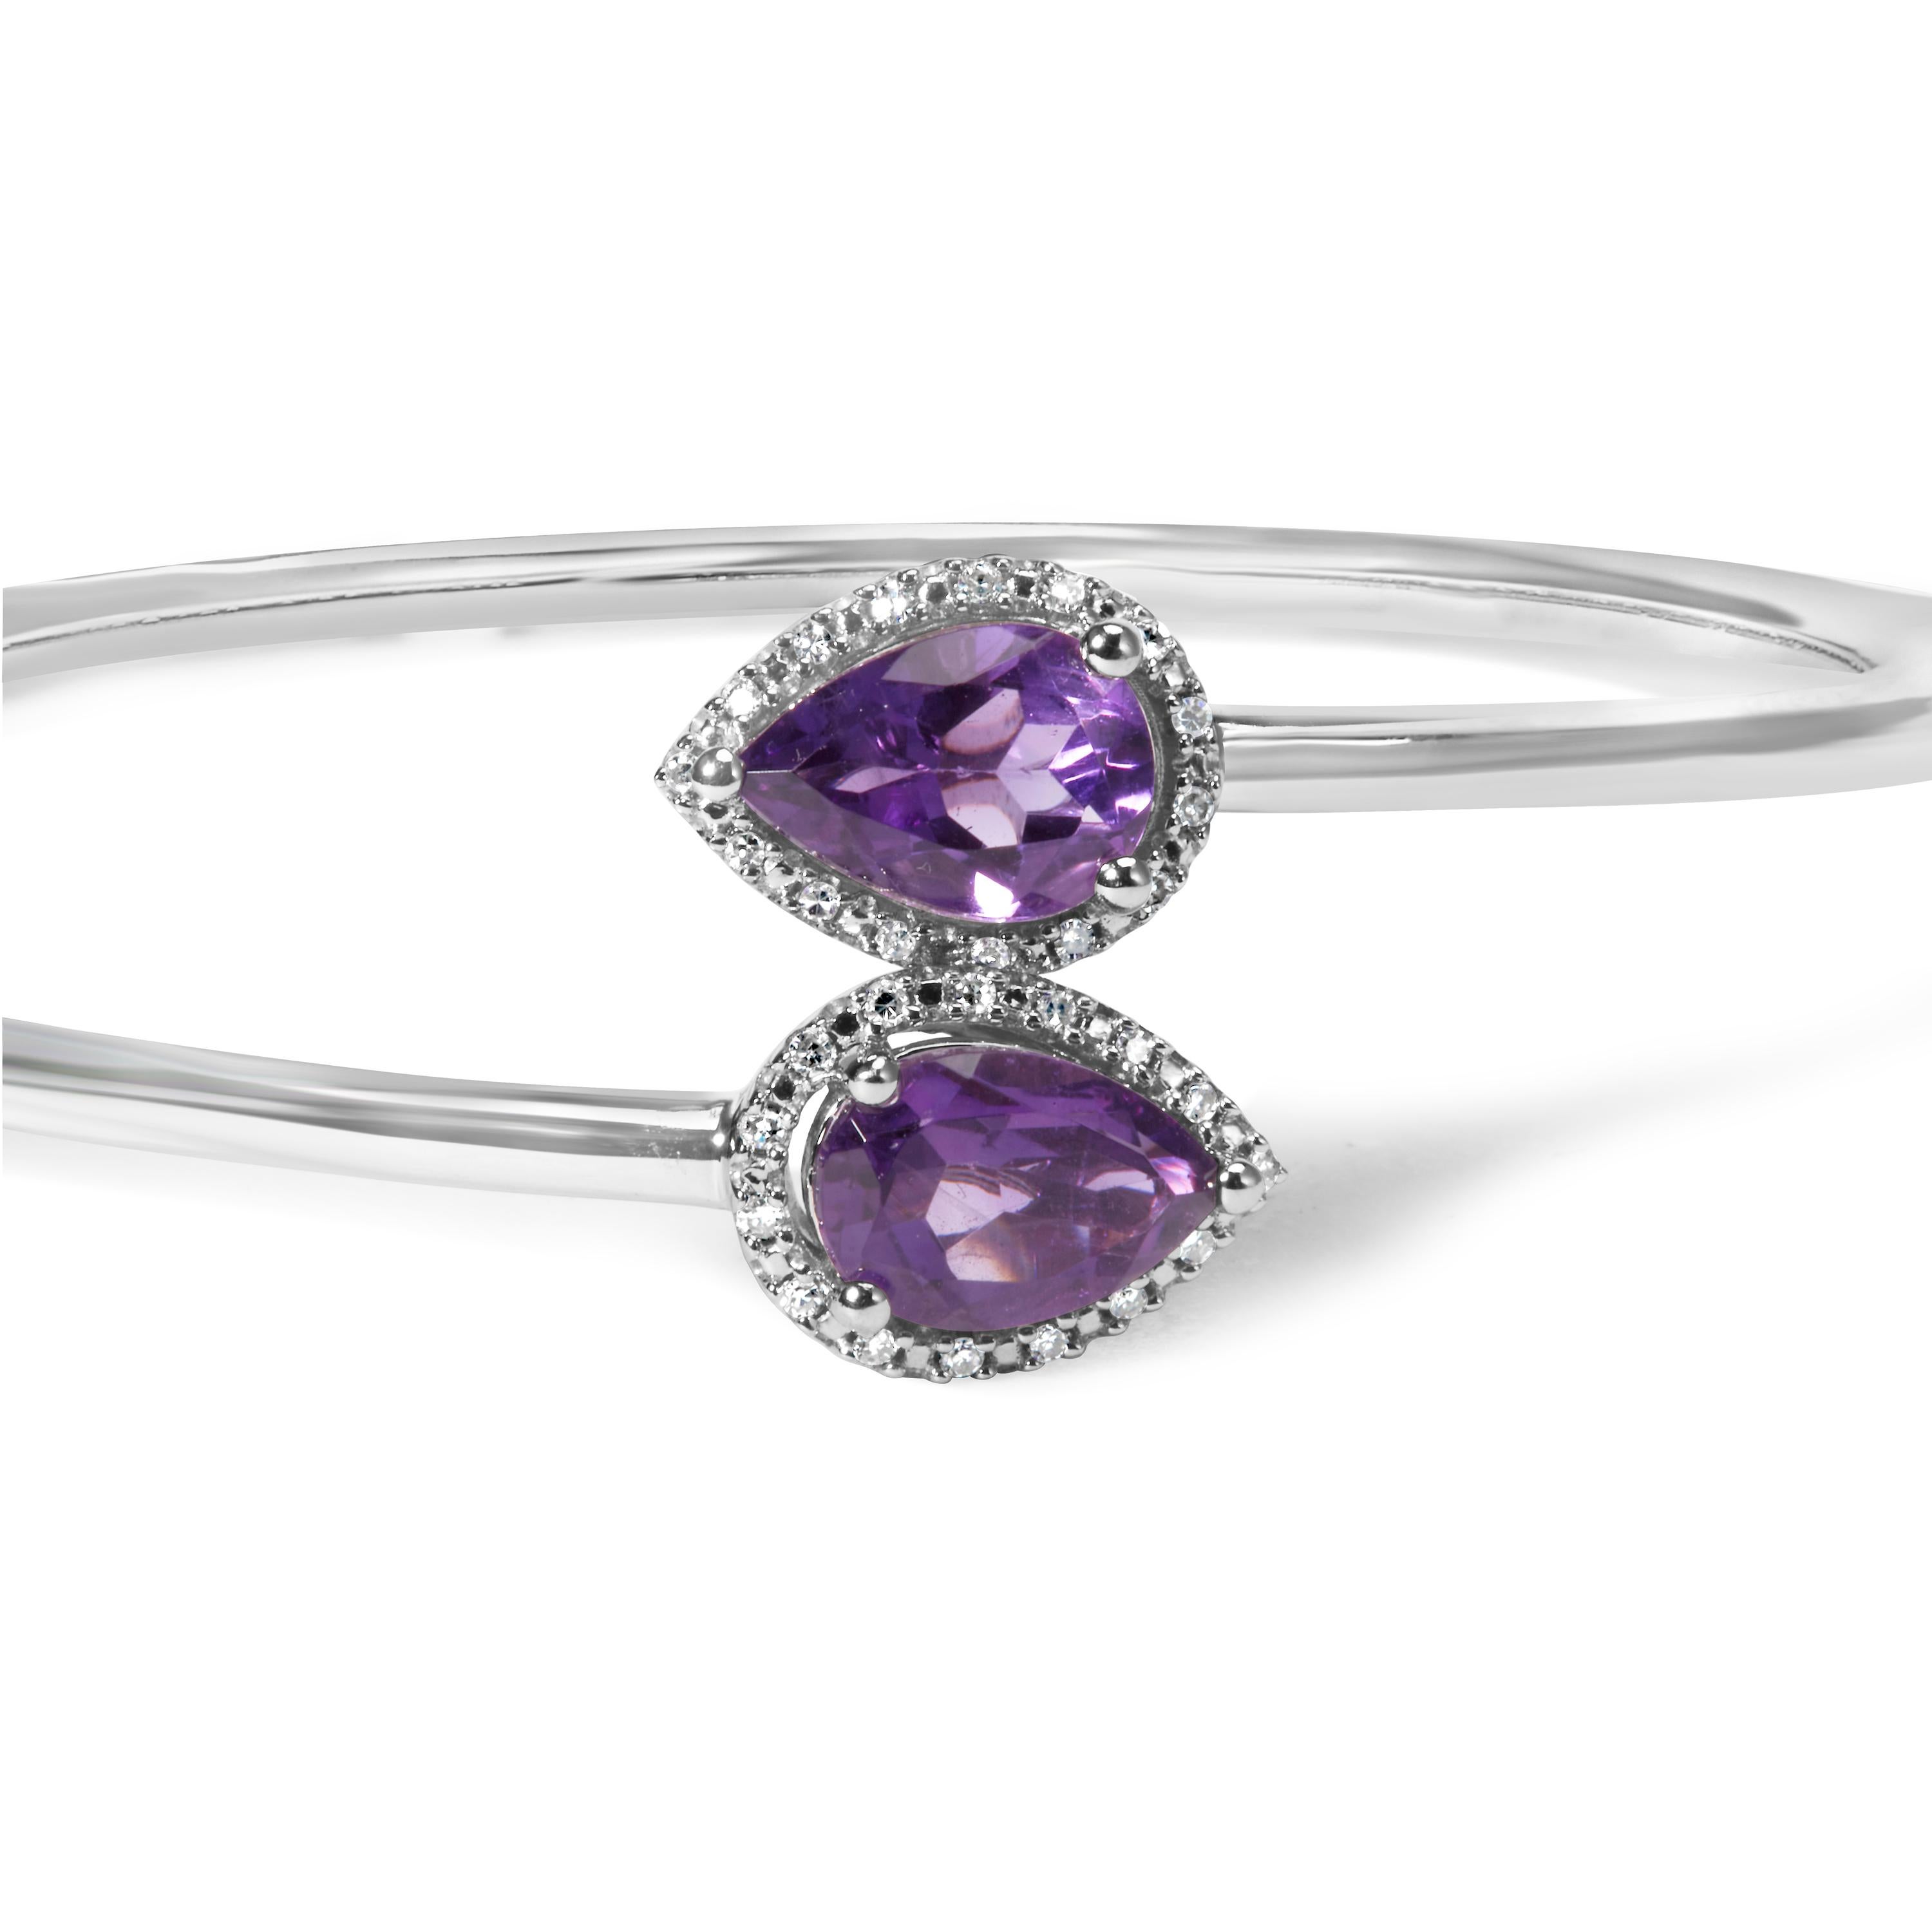 Indulge in the exquisite beauty of this .925 Sterling Silver Bangle Bracelet. Adorned with a dazzling 8 x 5.5mm Pear Shape Amethyst, this piece captures the essence of elegance. The Amethyst's vibrant purple hue is enhanced by the sparkling